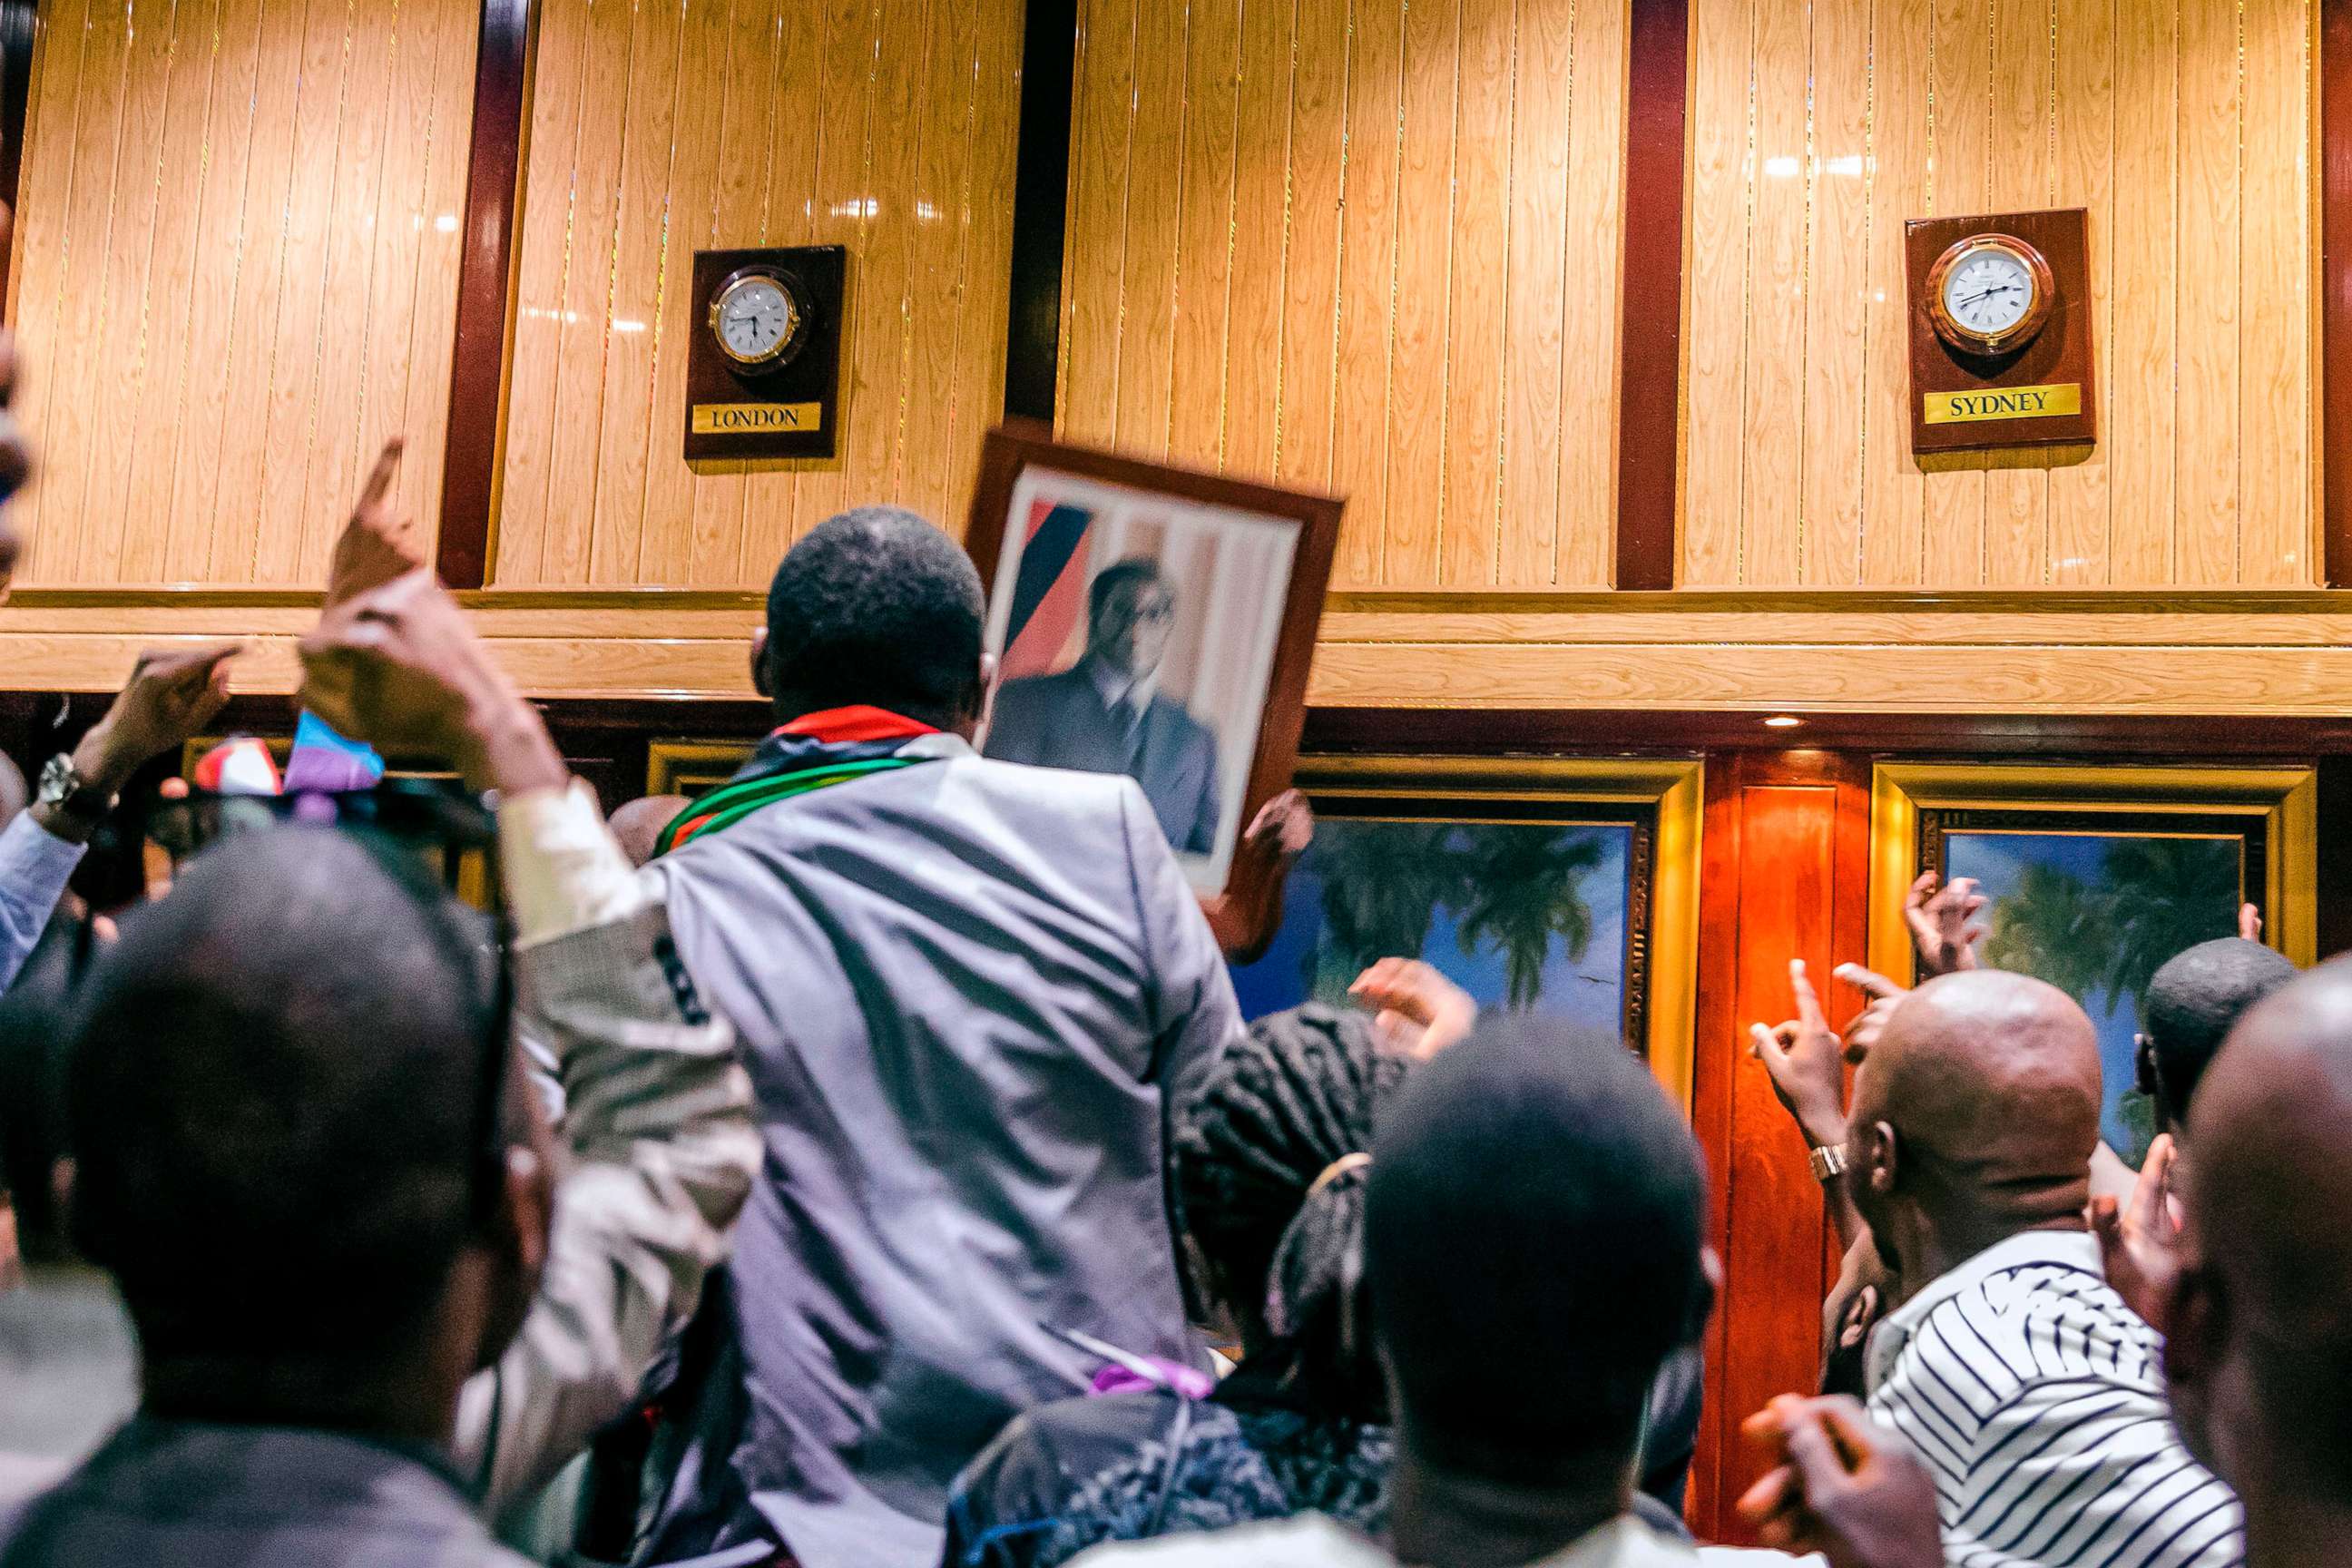 PHOTO: People remove, from the wall at the International Conference center, where parliament had their sitting, the portrait of former Zimbabwean President Robert Mugabe after his resignation on Nov. 21, 2017 in Harare.